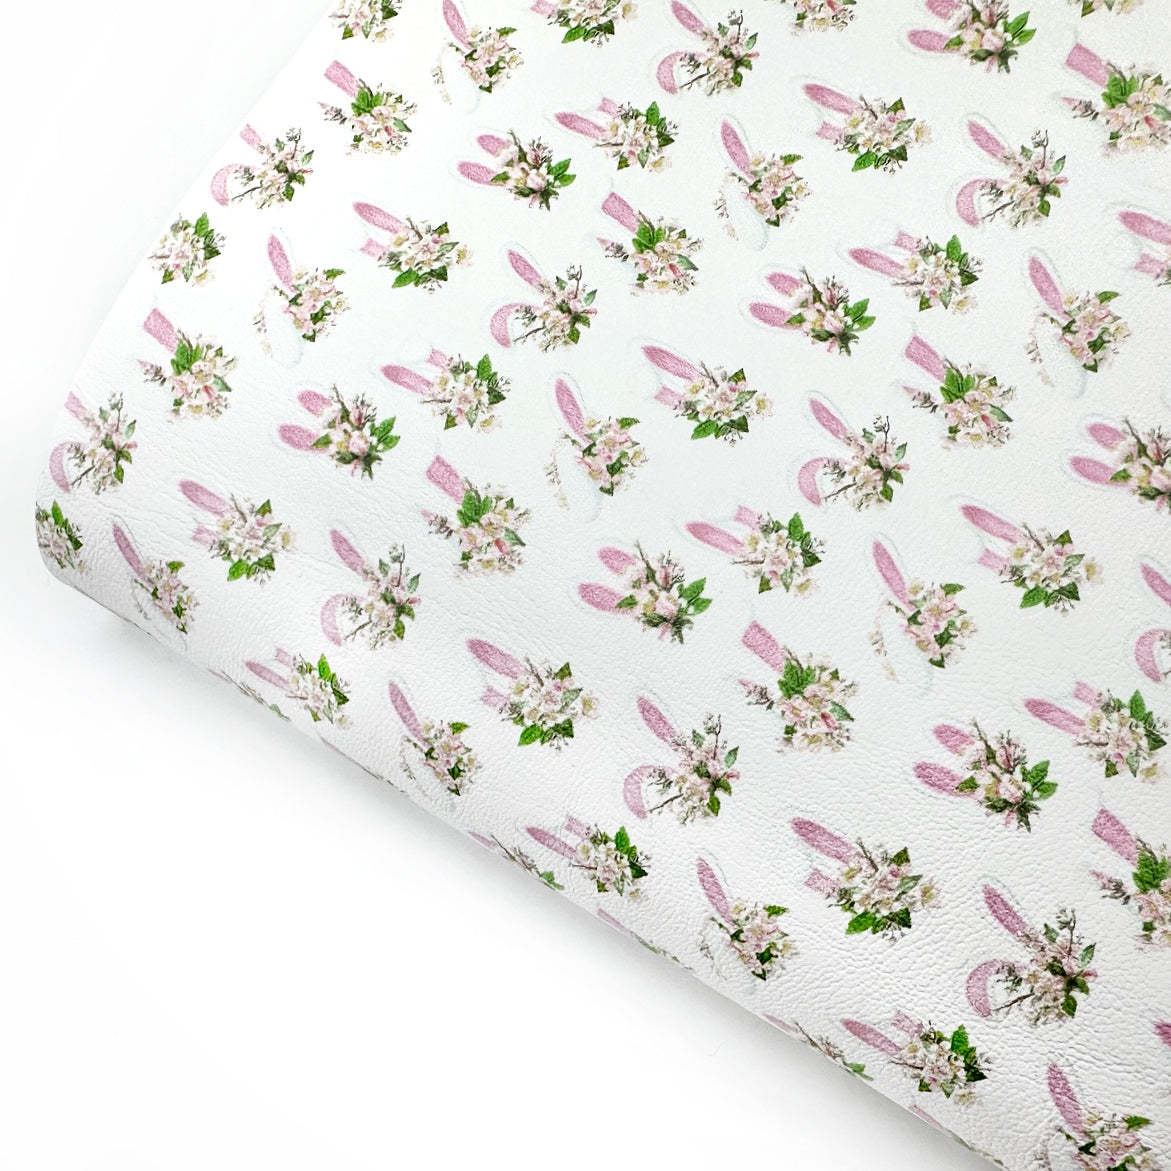 Flower Crown Bunny Ears Premium Faux Leather Fabric Sheets